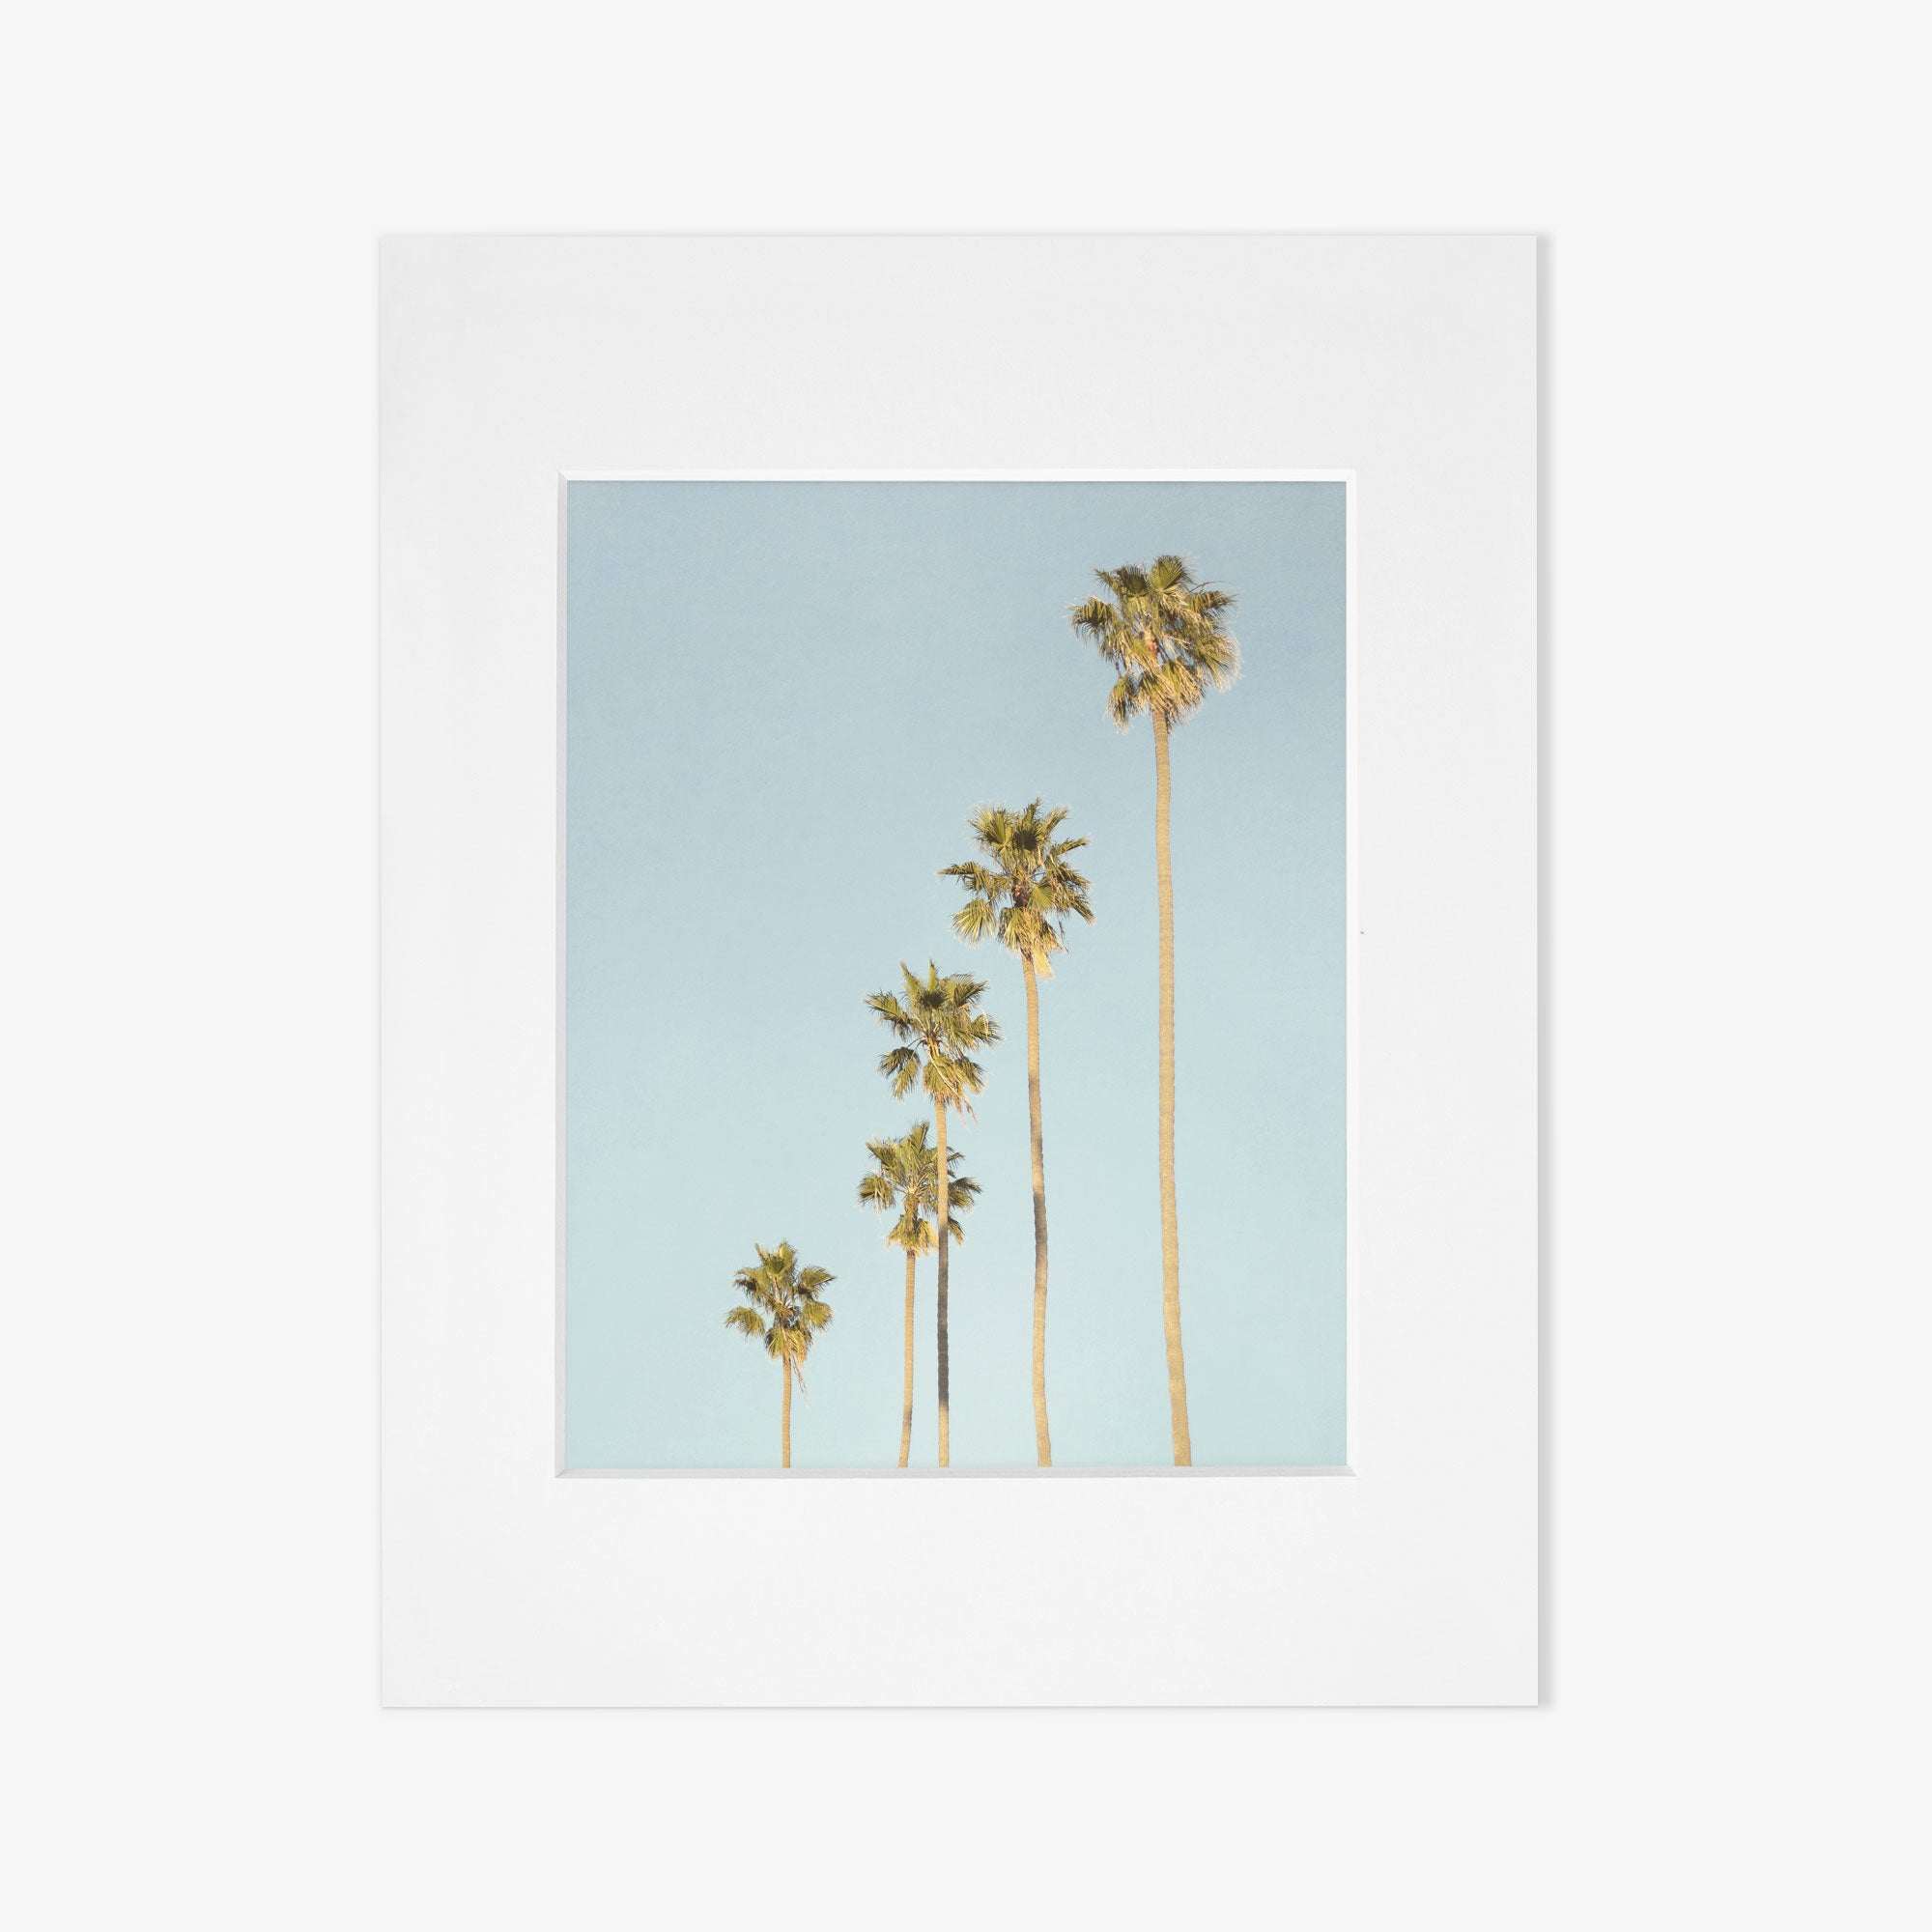 A simple white square picture frame with a large white border and a gray placeholder featuring an Offley Green Los Angeles Palm Tree Photographic Print &#39;Palm Tree Steps&#39;, set against a white background.